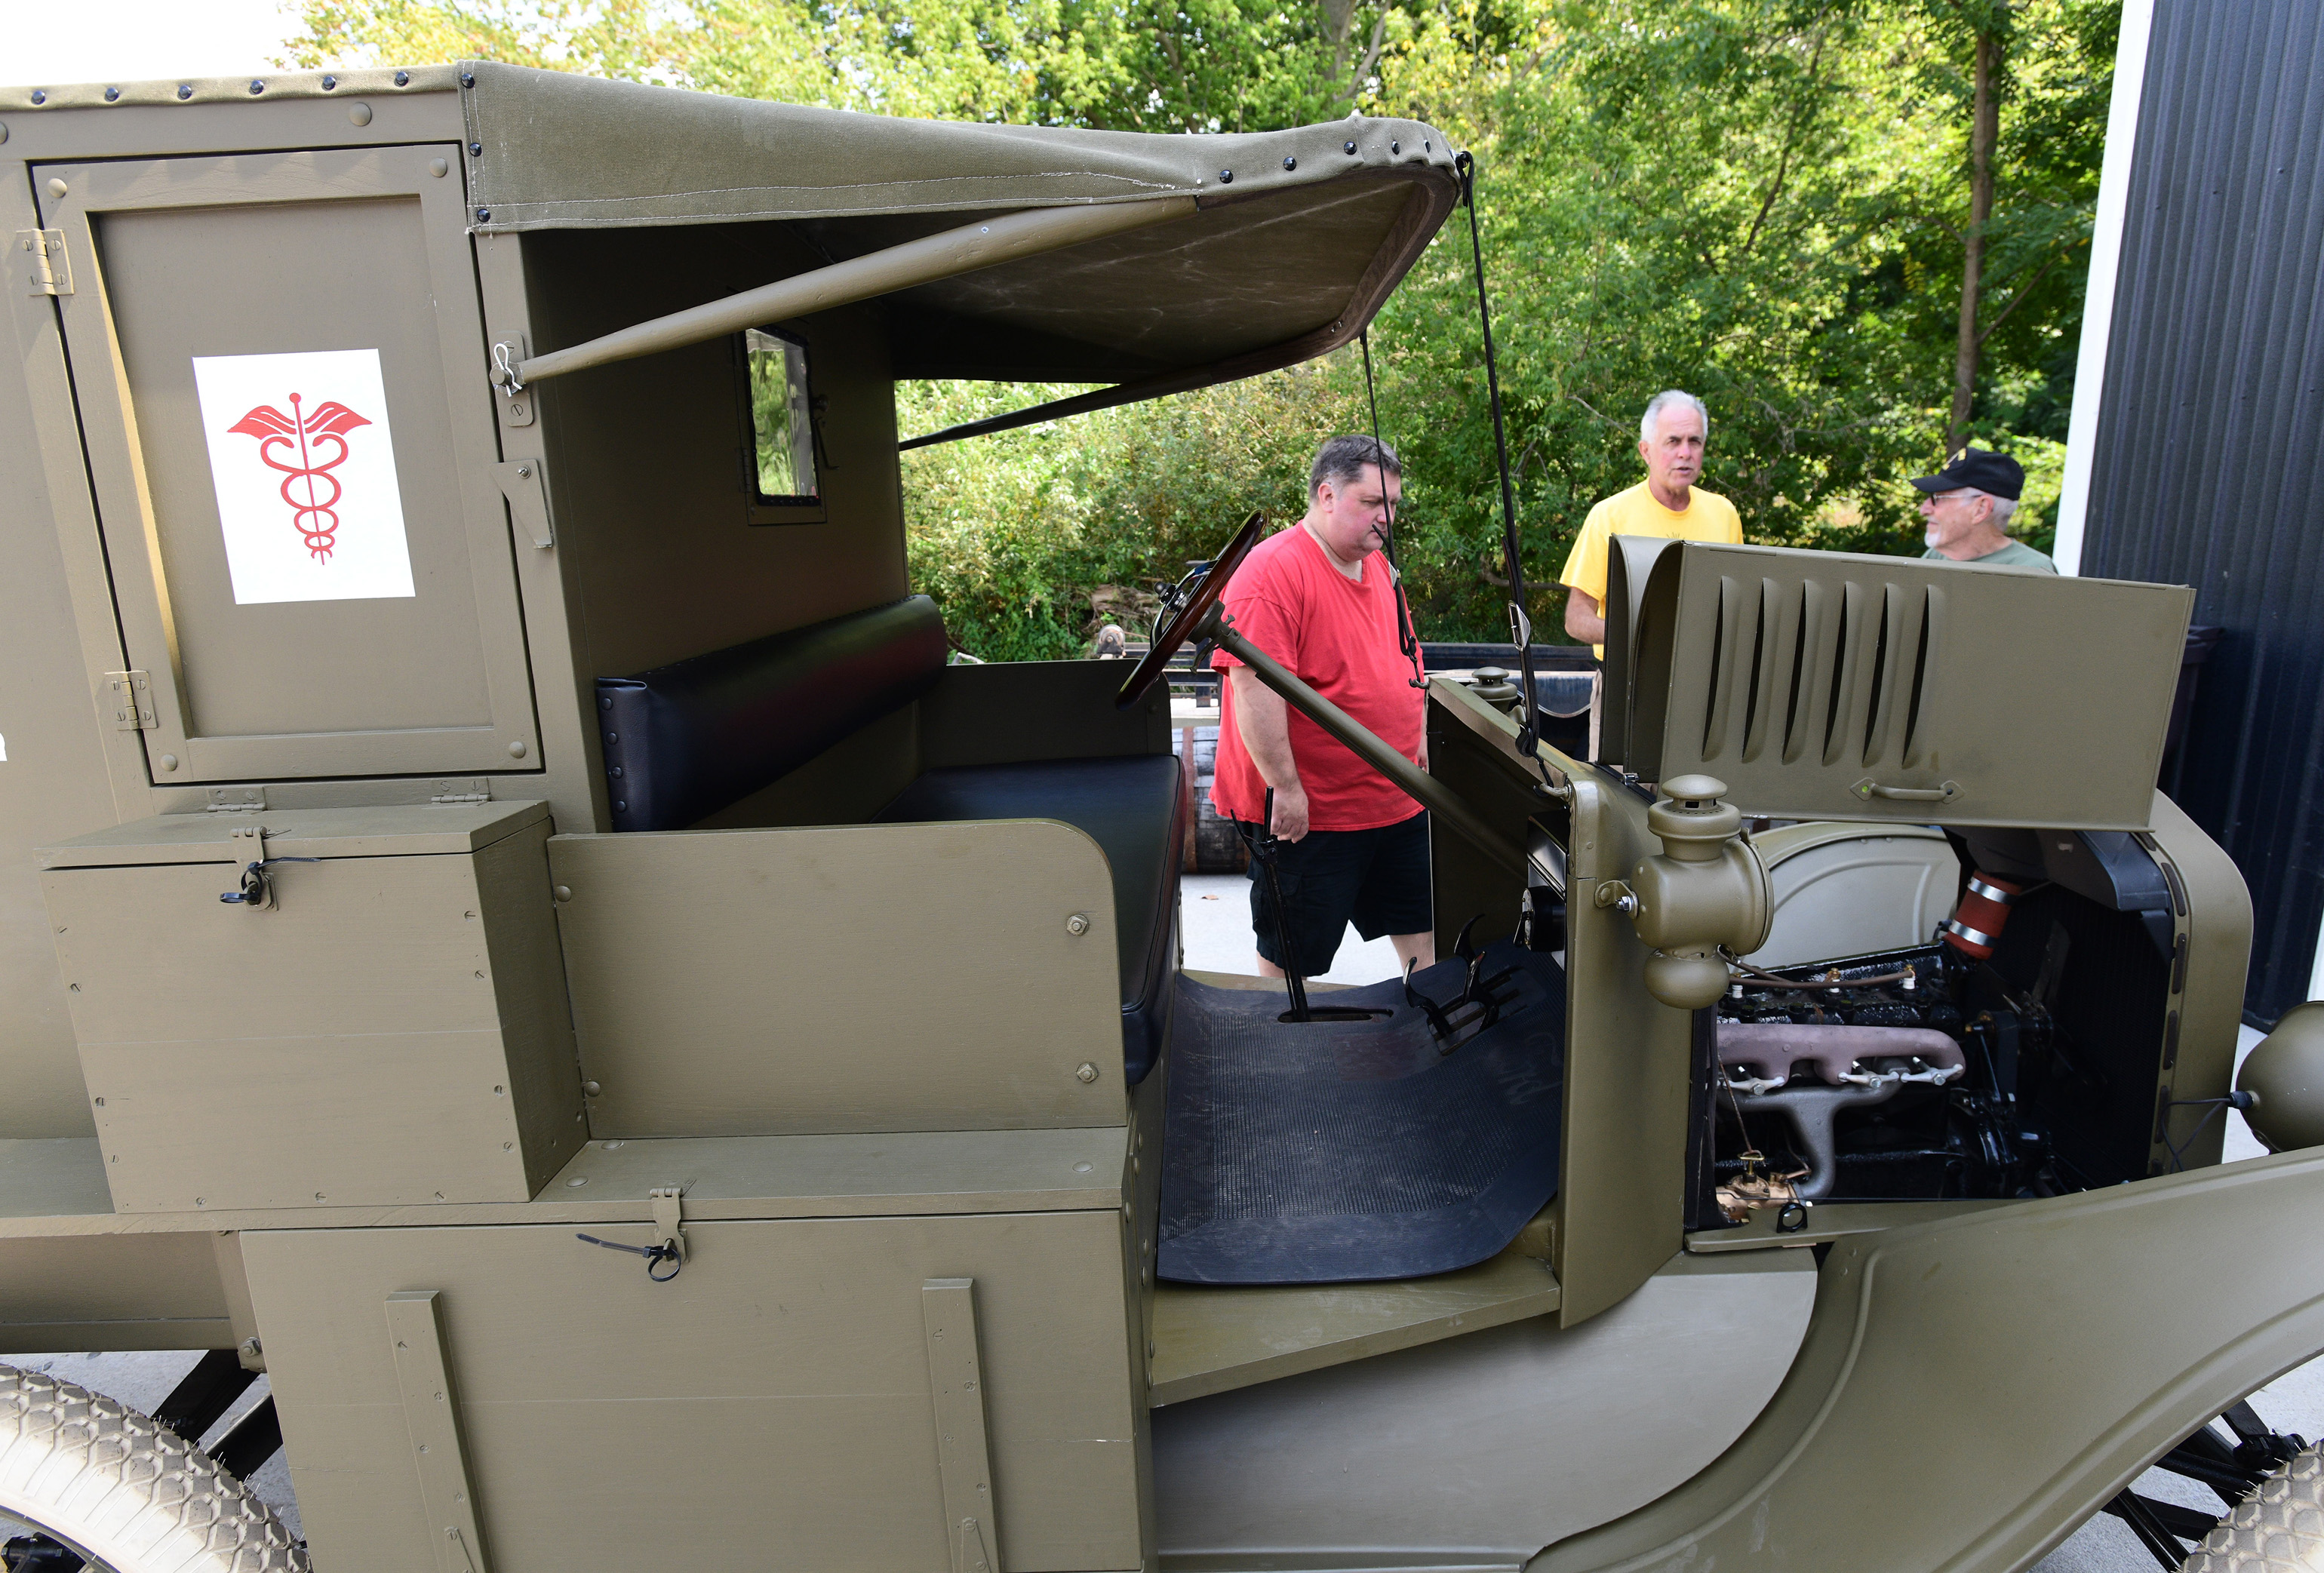 The Michigan Military Heritage Museum converted a 1917 Ford Model T to a World War I era ambulance. The ambulance was on display at the Grass Lake museum on Thursday, Aug. 27, 2020. It took three years for the restoration to complete.